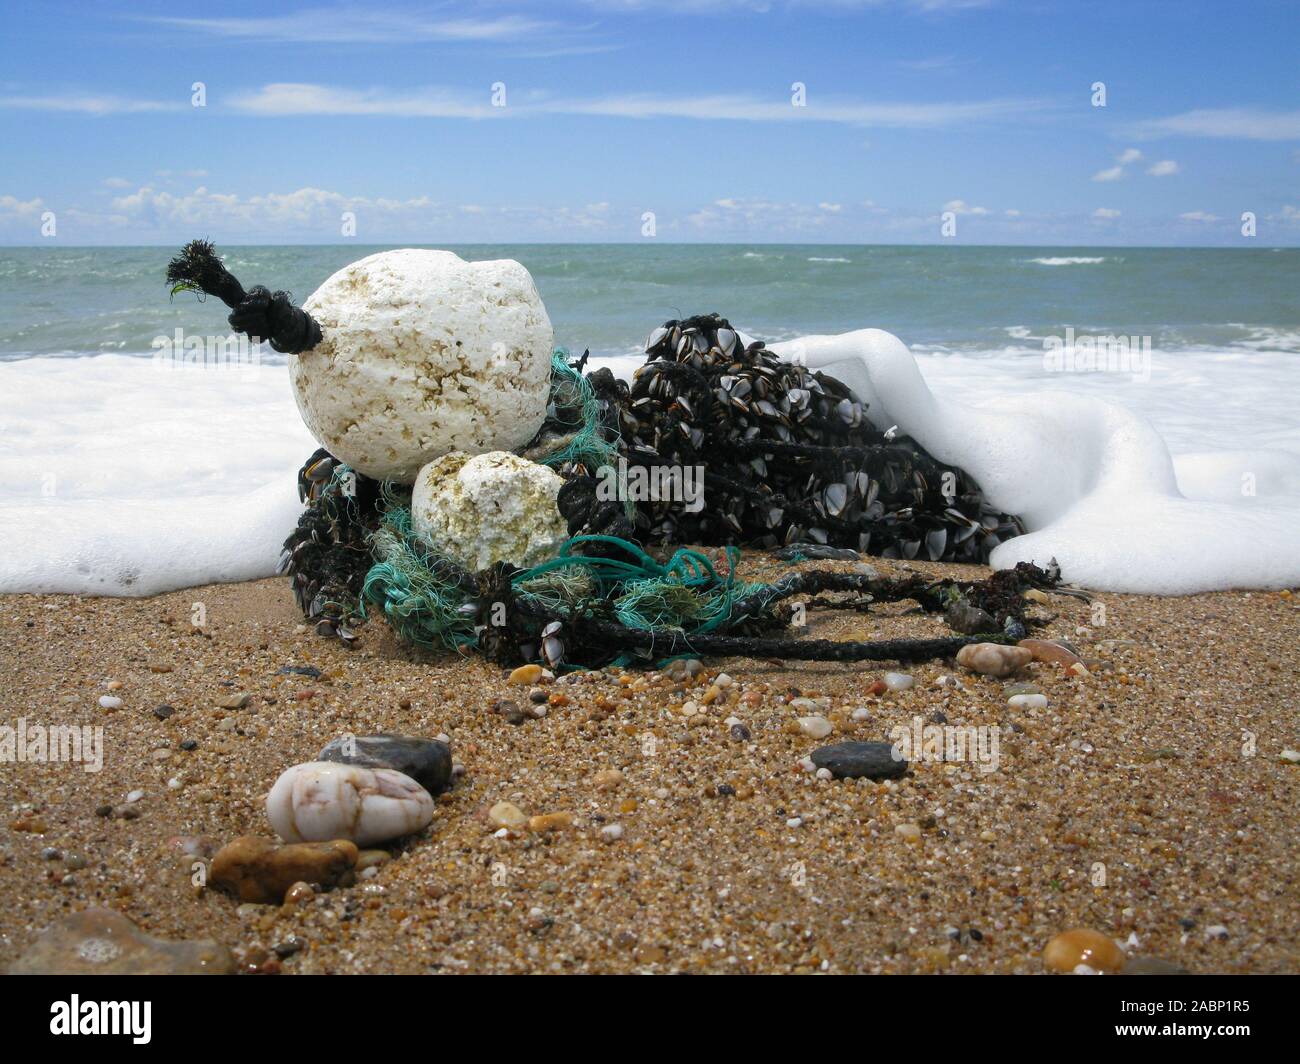 Discarded rubbish, fishing net, floats and debris washed onto the beach Bretignolles-sur-Mer, Vendee, South west France Stock Photo